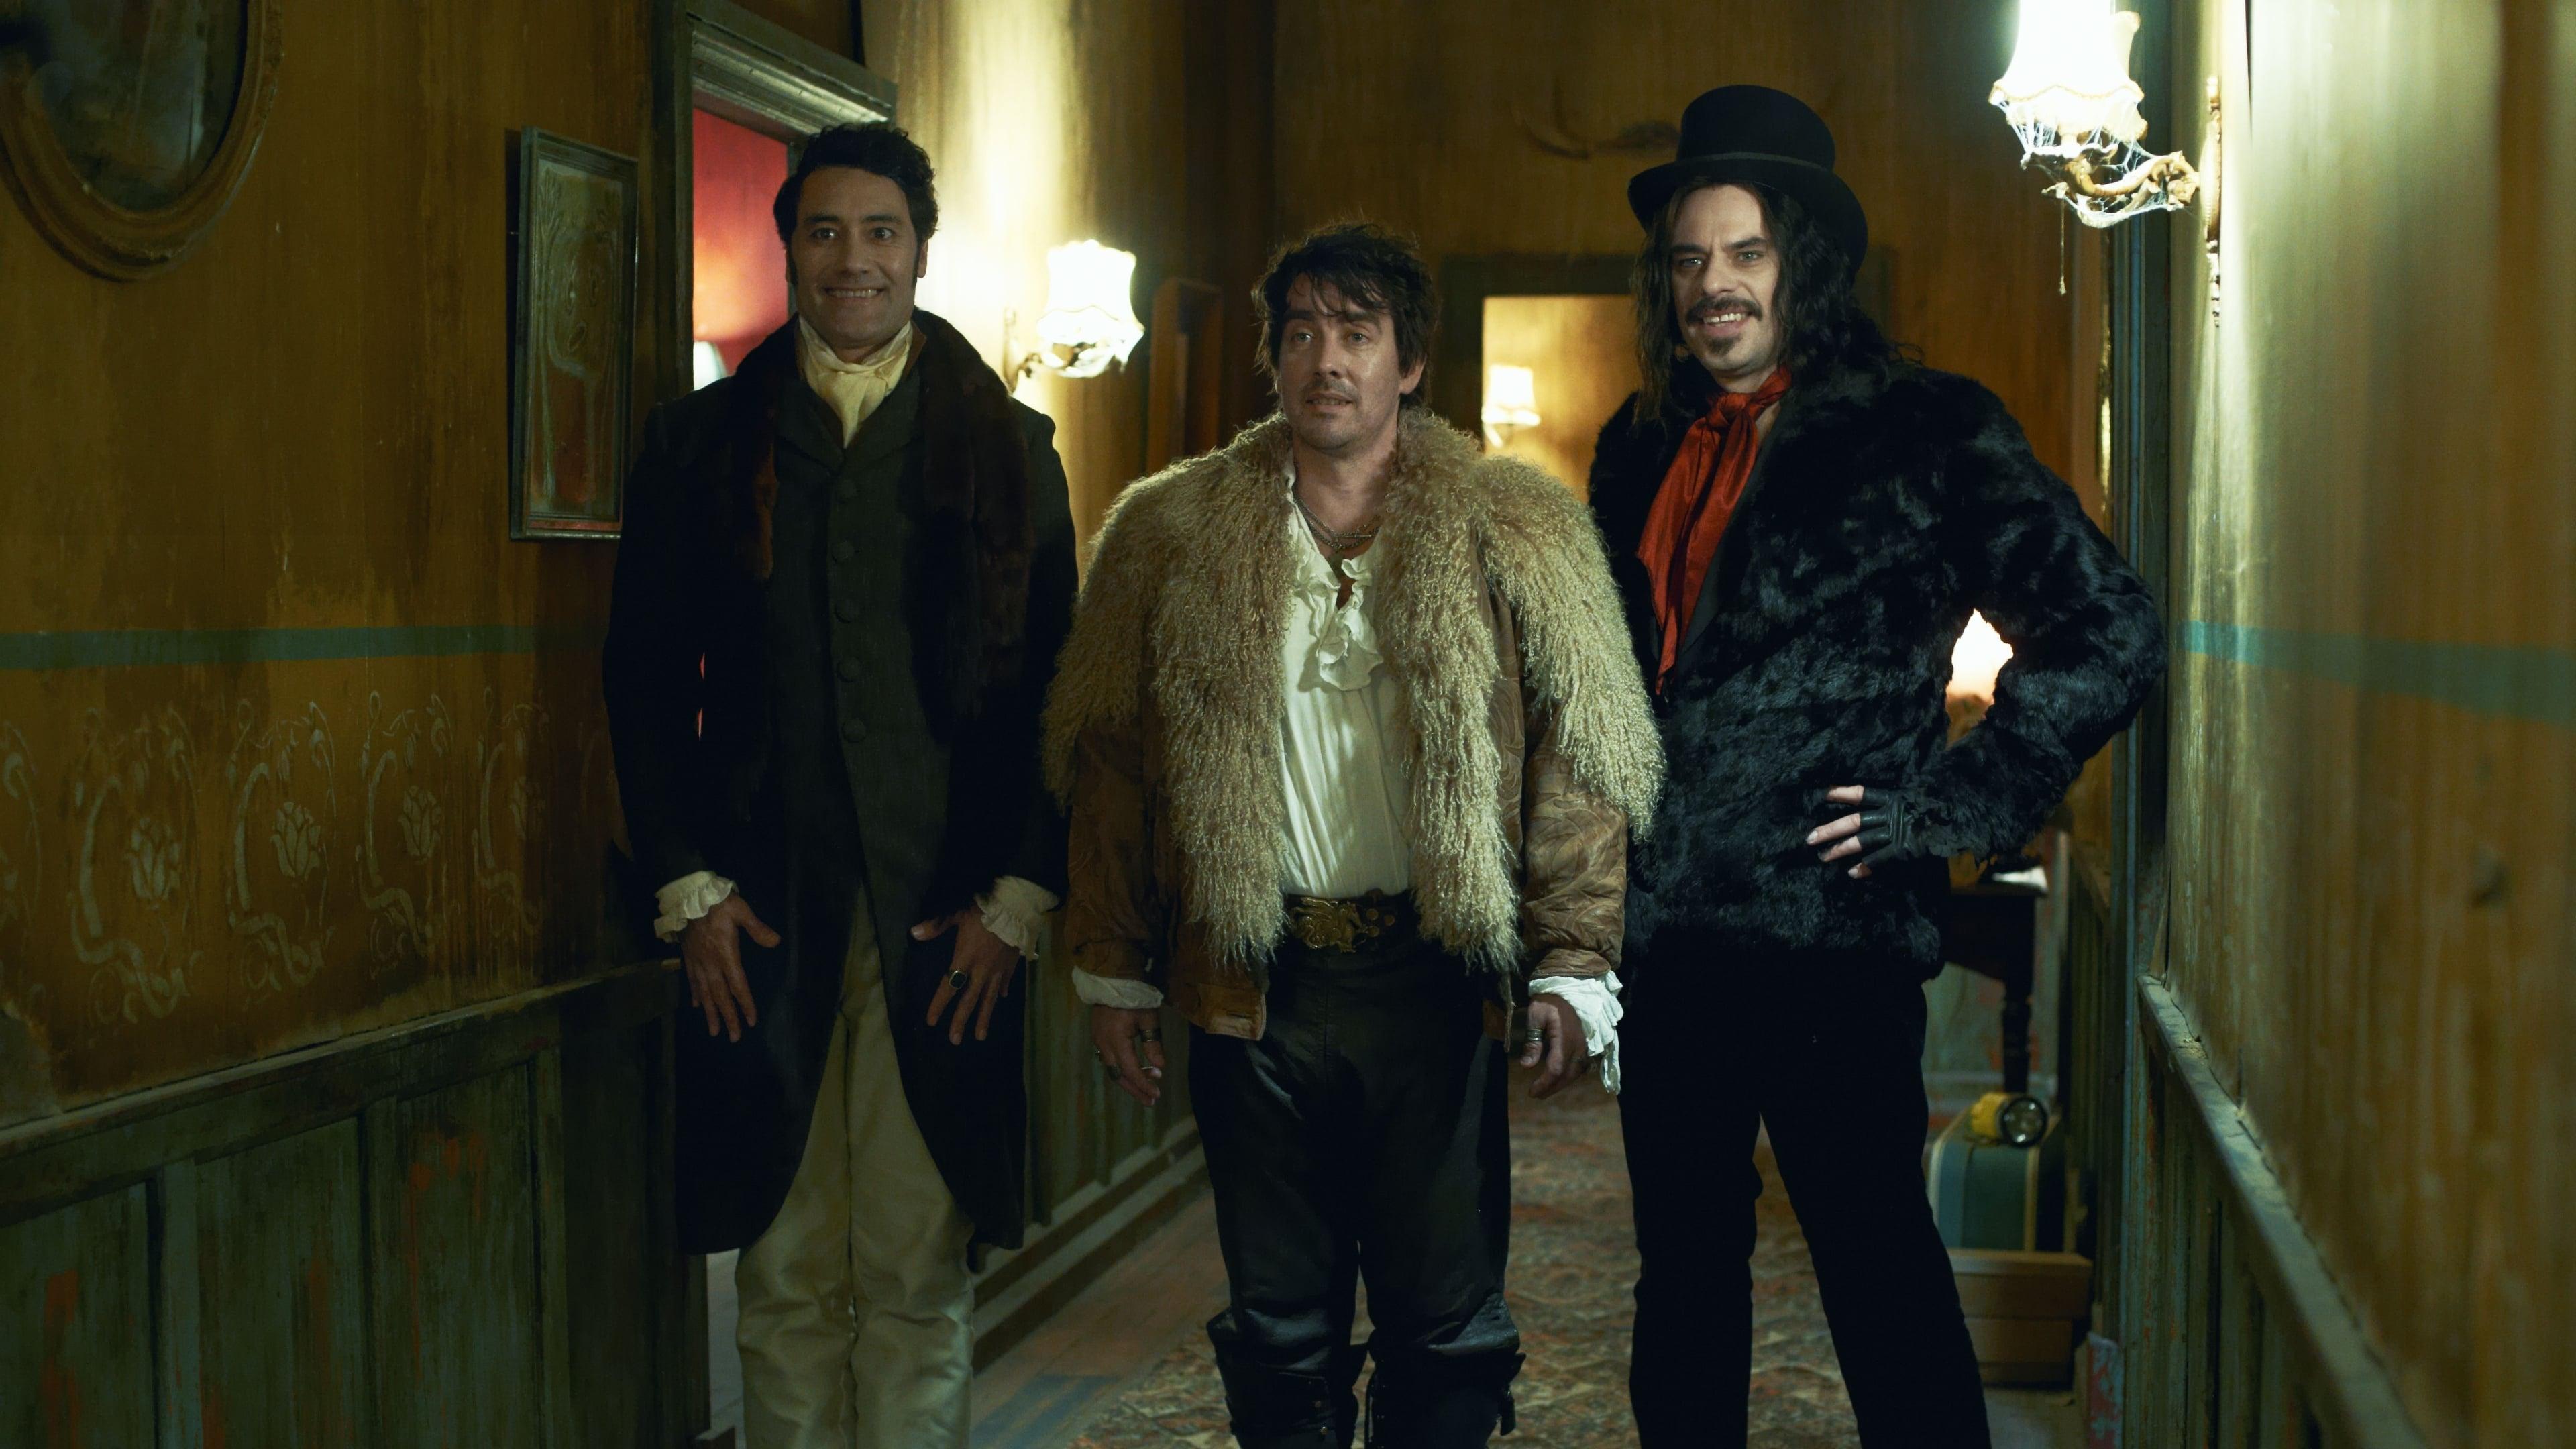 What We Do in the Shadows backdrop